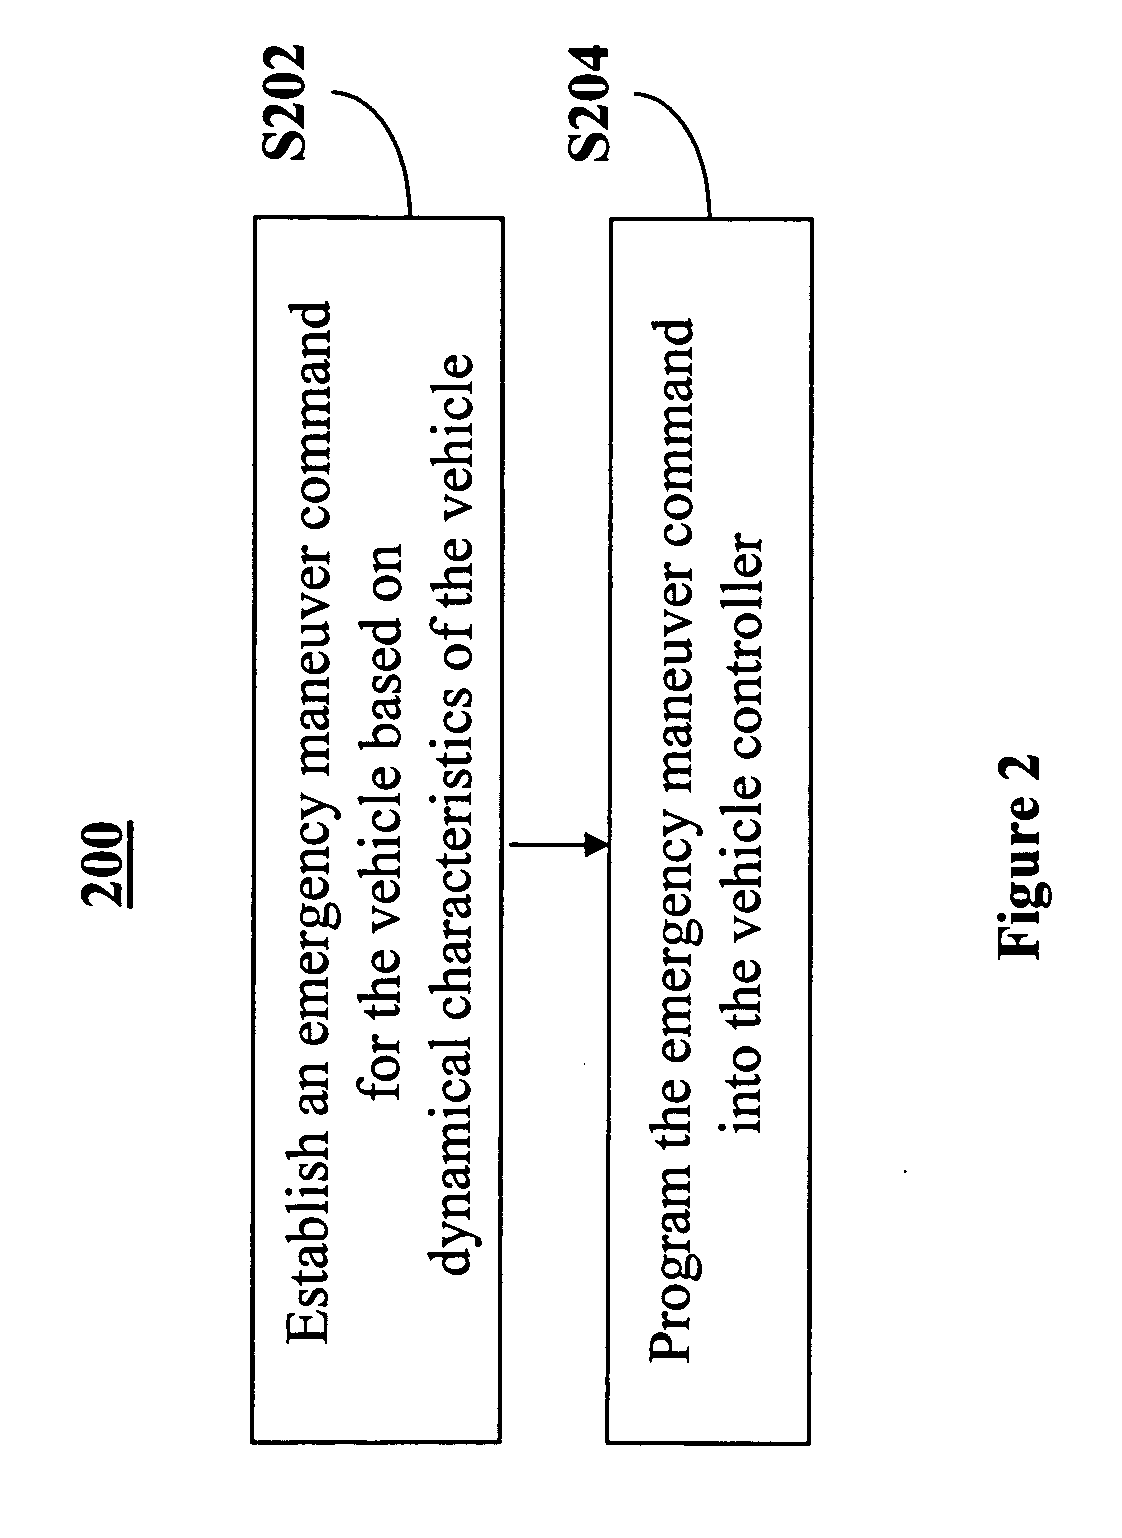 System and method of collision avoidance using an invarient set based on vehicle states and dynamic characteristics